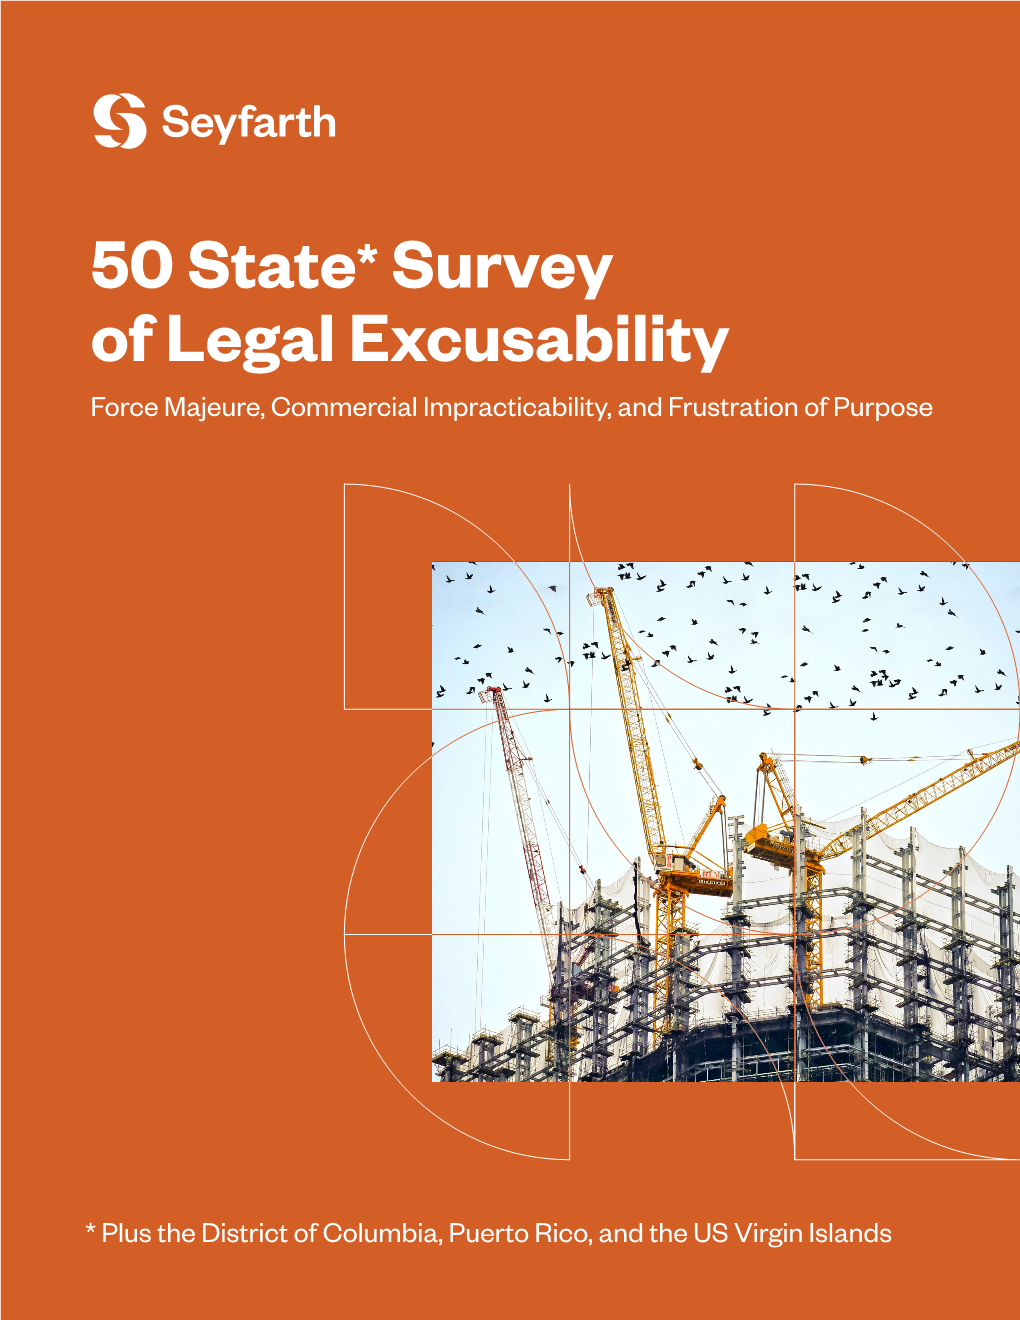 50 State* Survey of Legal Excusability Force Majeure, Commercial Impracticability, and Frustration of Purpose